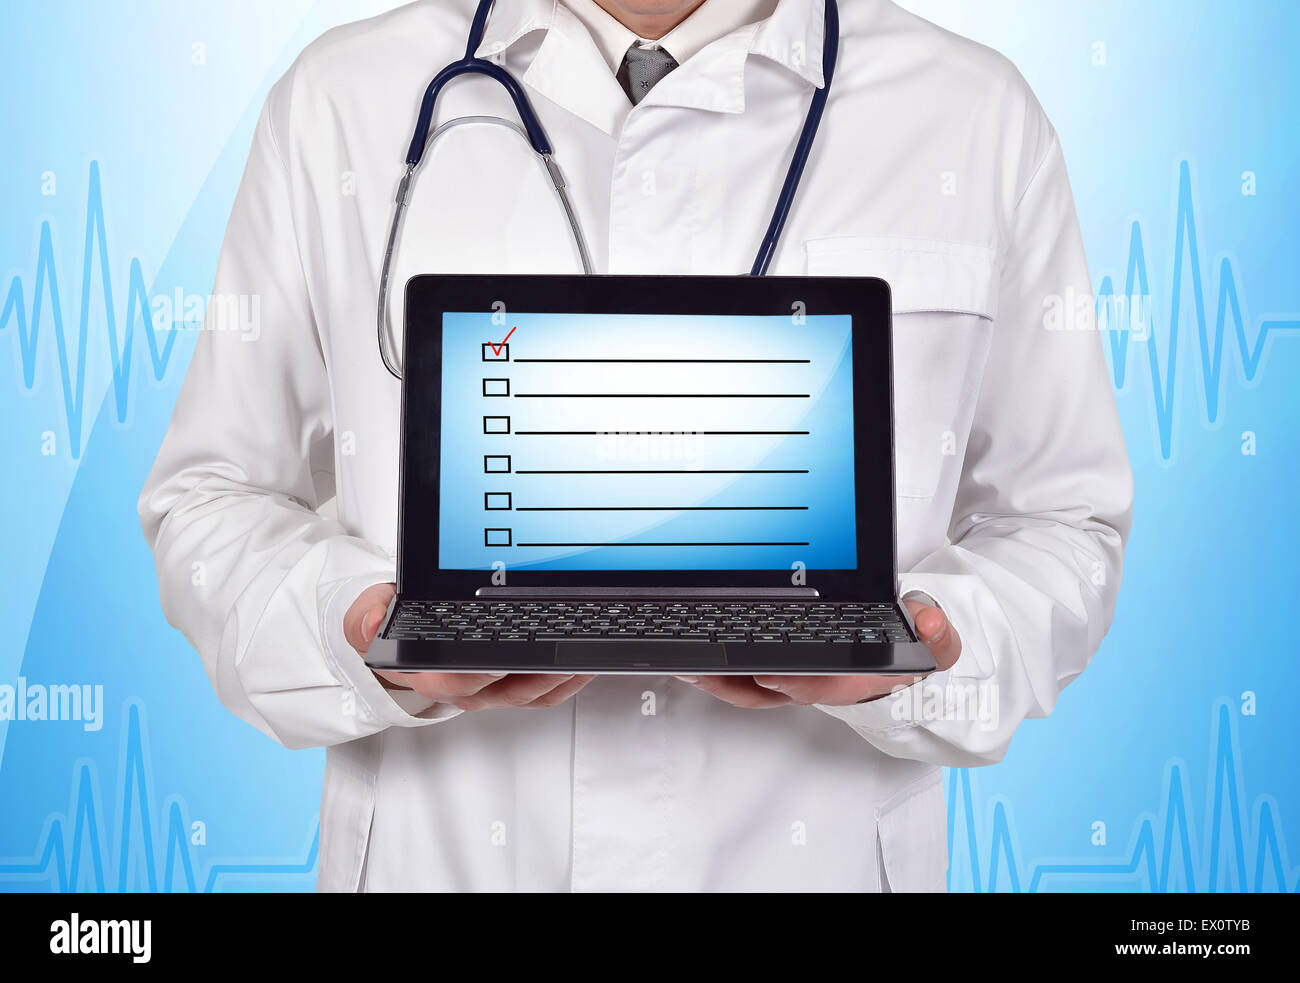 doctor holding notebook with application form on screen Stock Photo